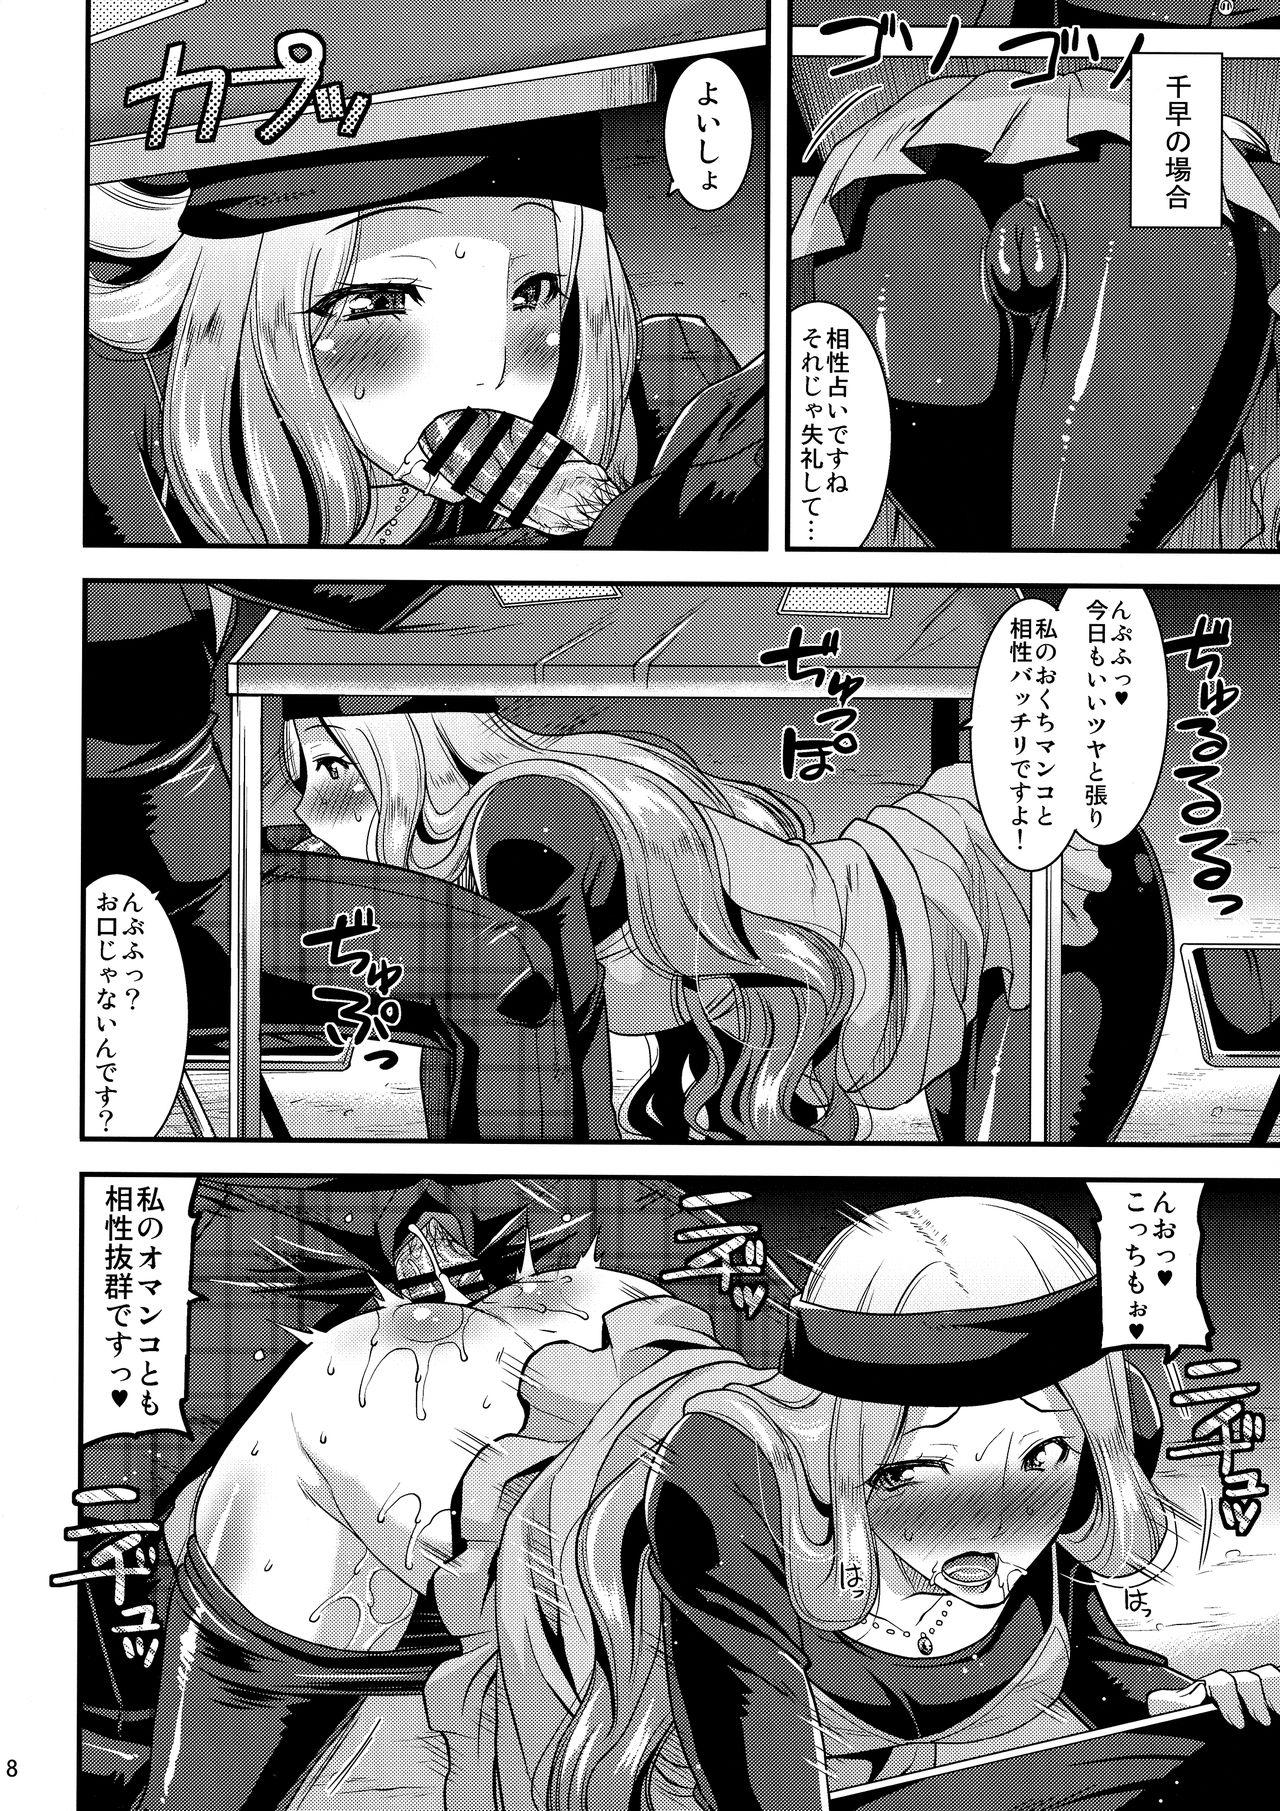 Fuck LET US START THE SEX - Persona 5 Chileno - Page 7